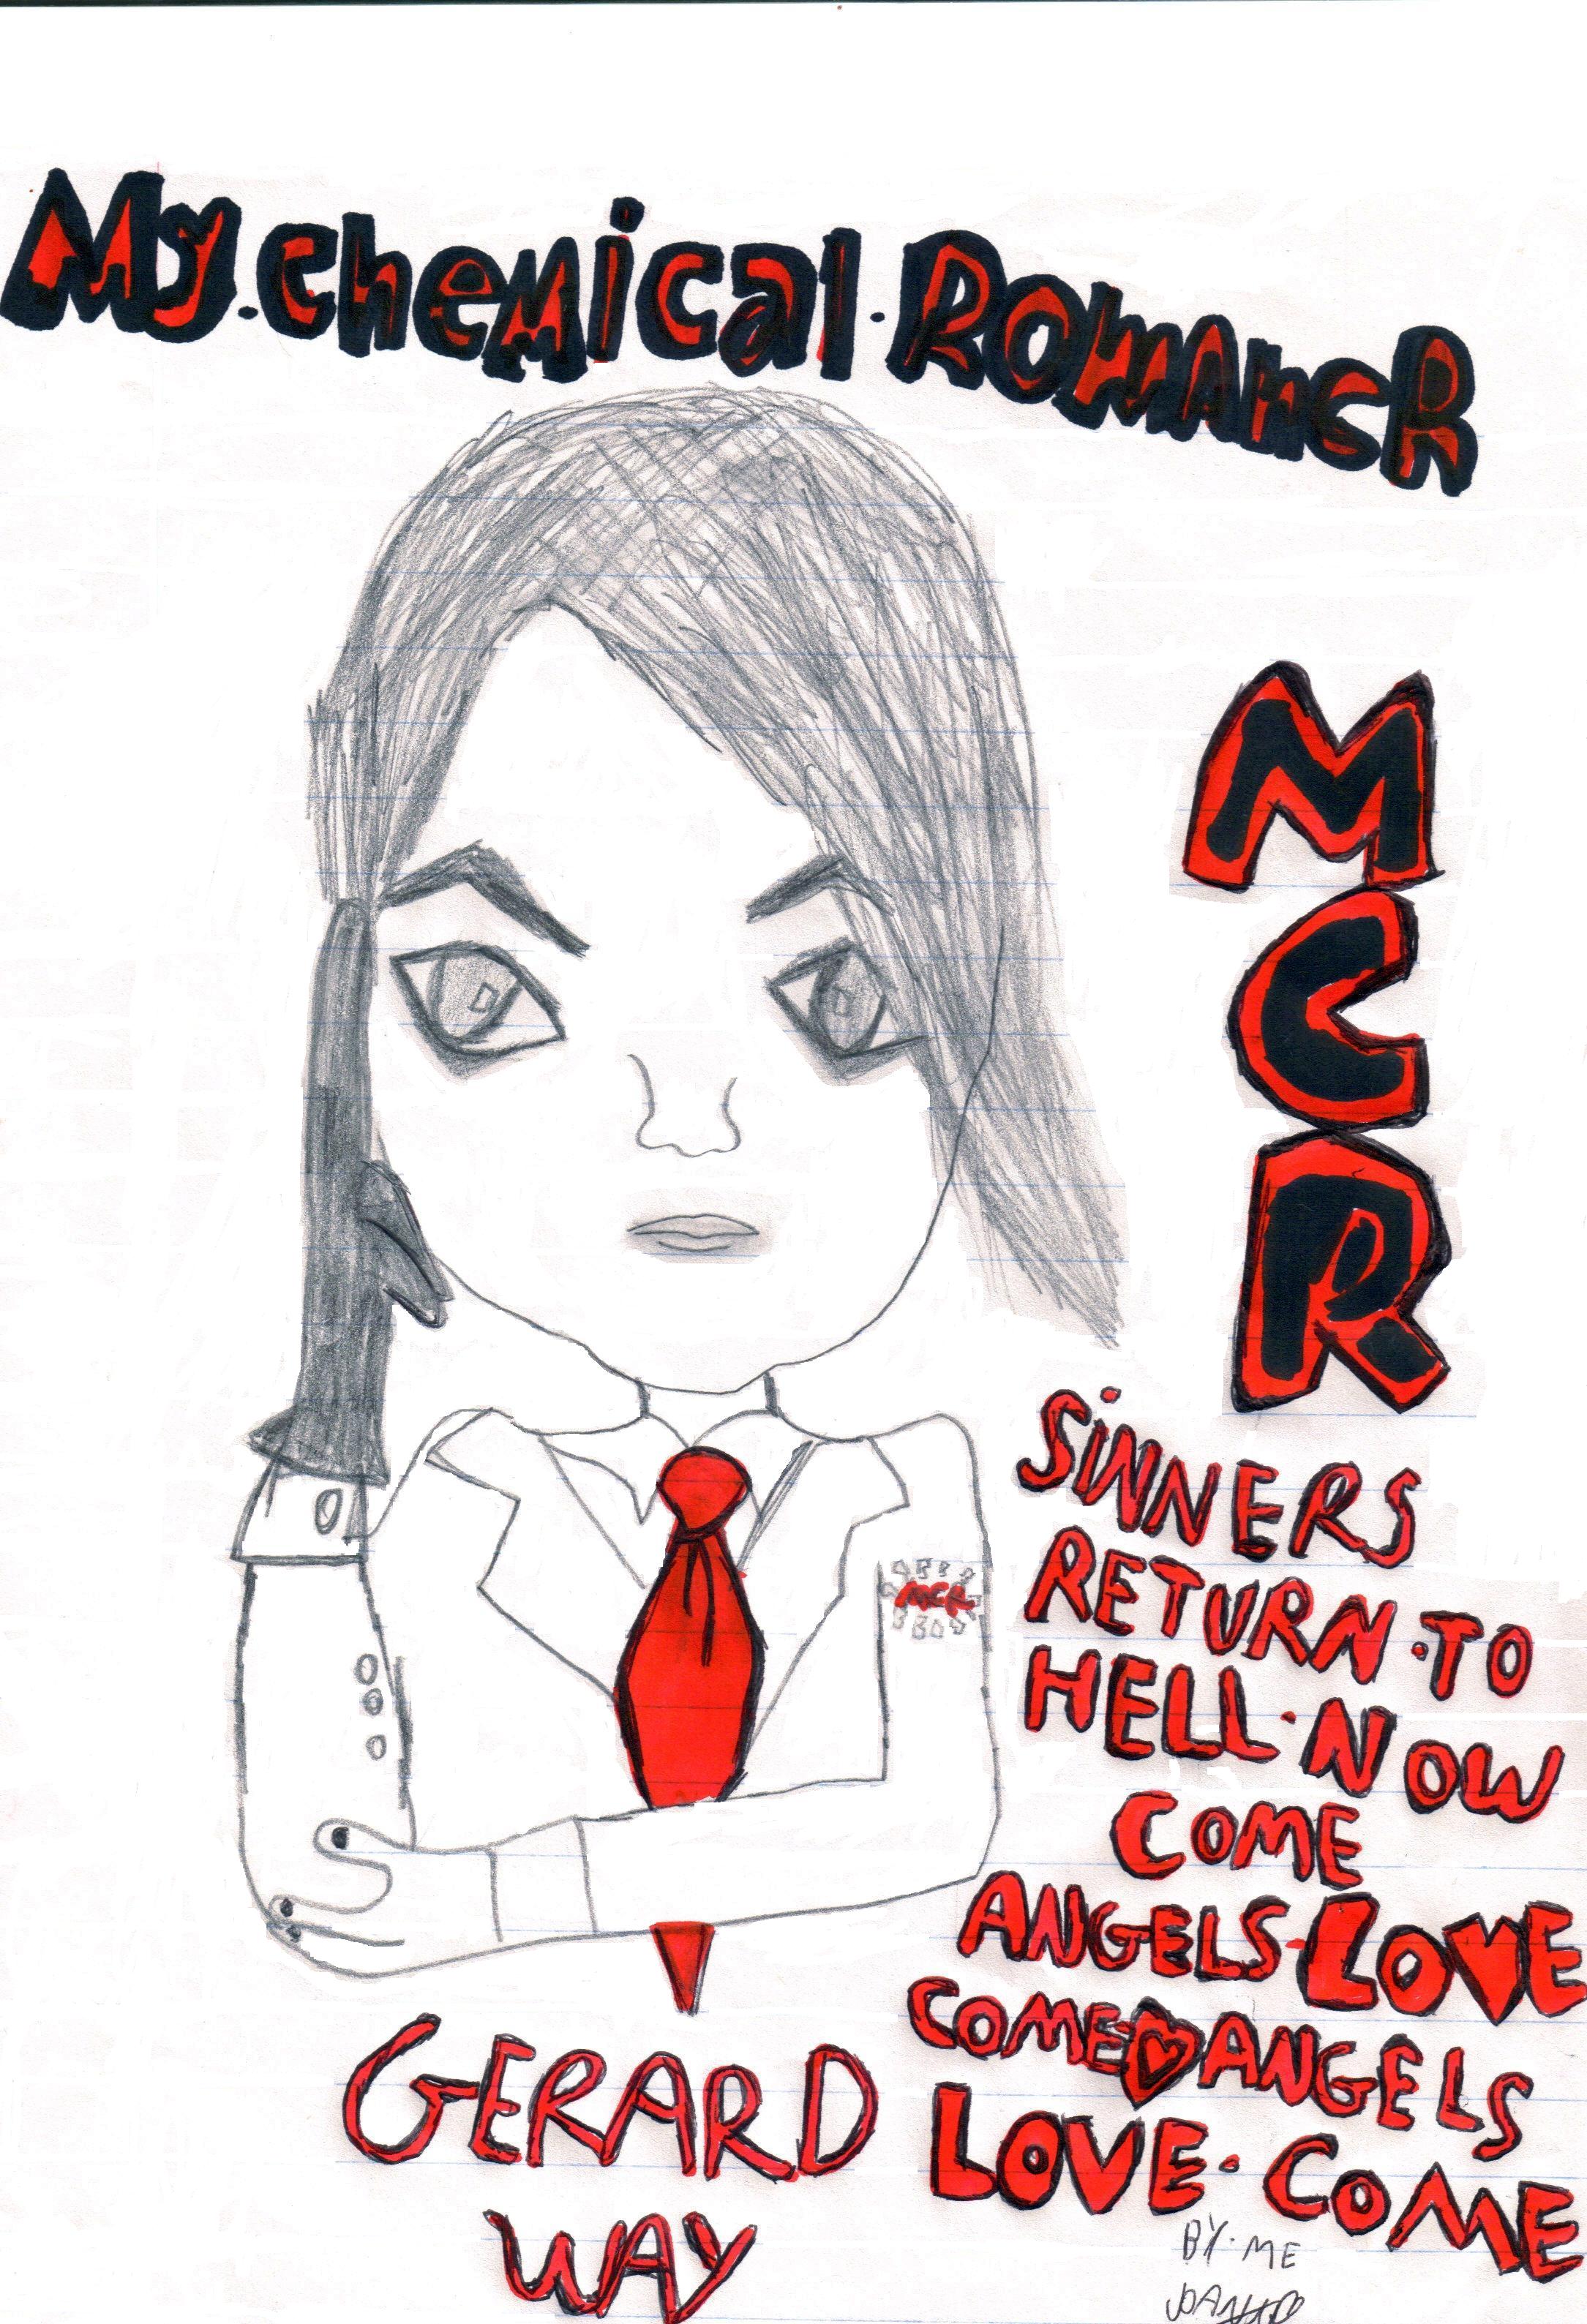 ANOTHER GERARD WAY DRAWING I MADE by missisxmaroon5xmissismcr